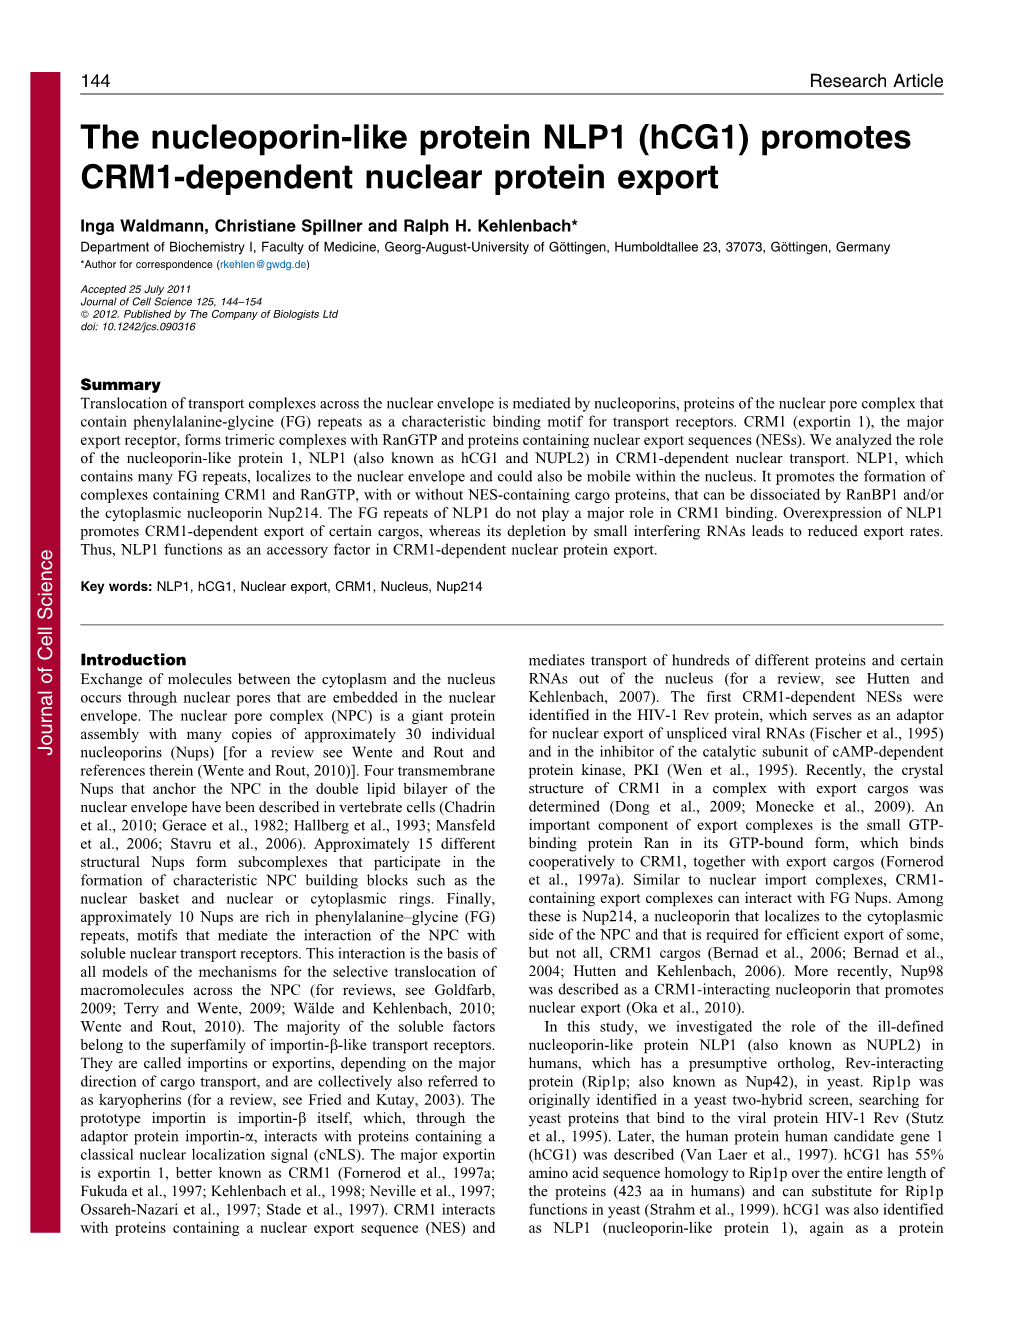 Promotes CRM1-Dependent Nuclear Protein Export